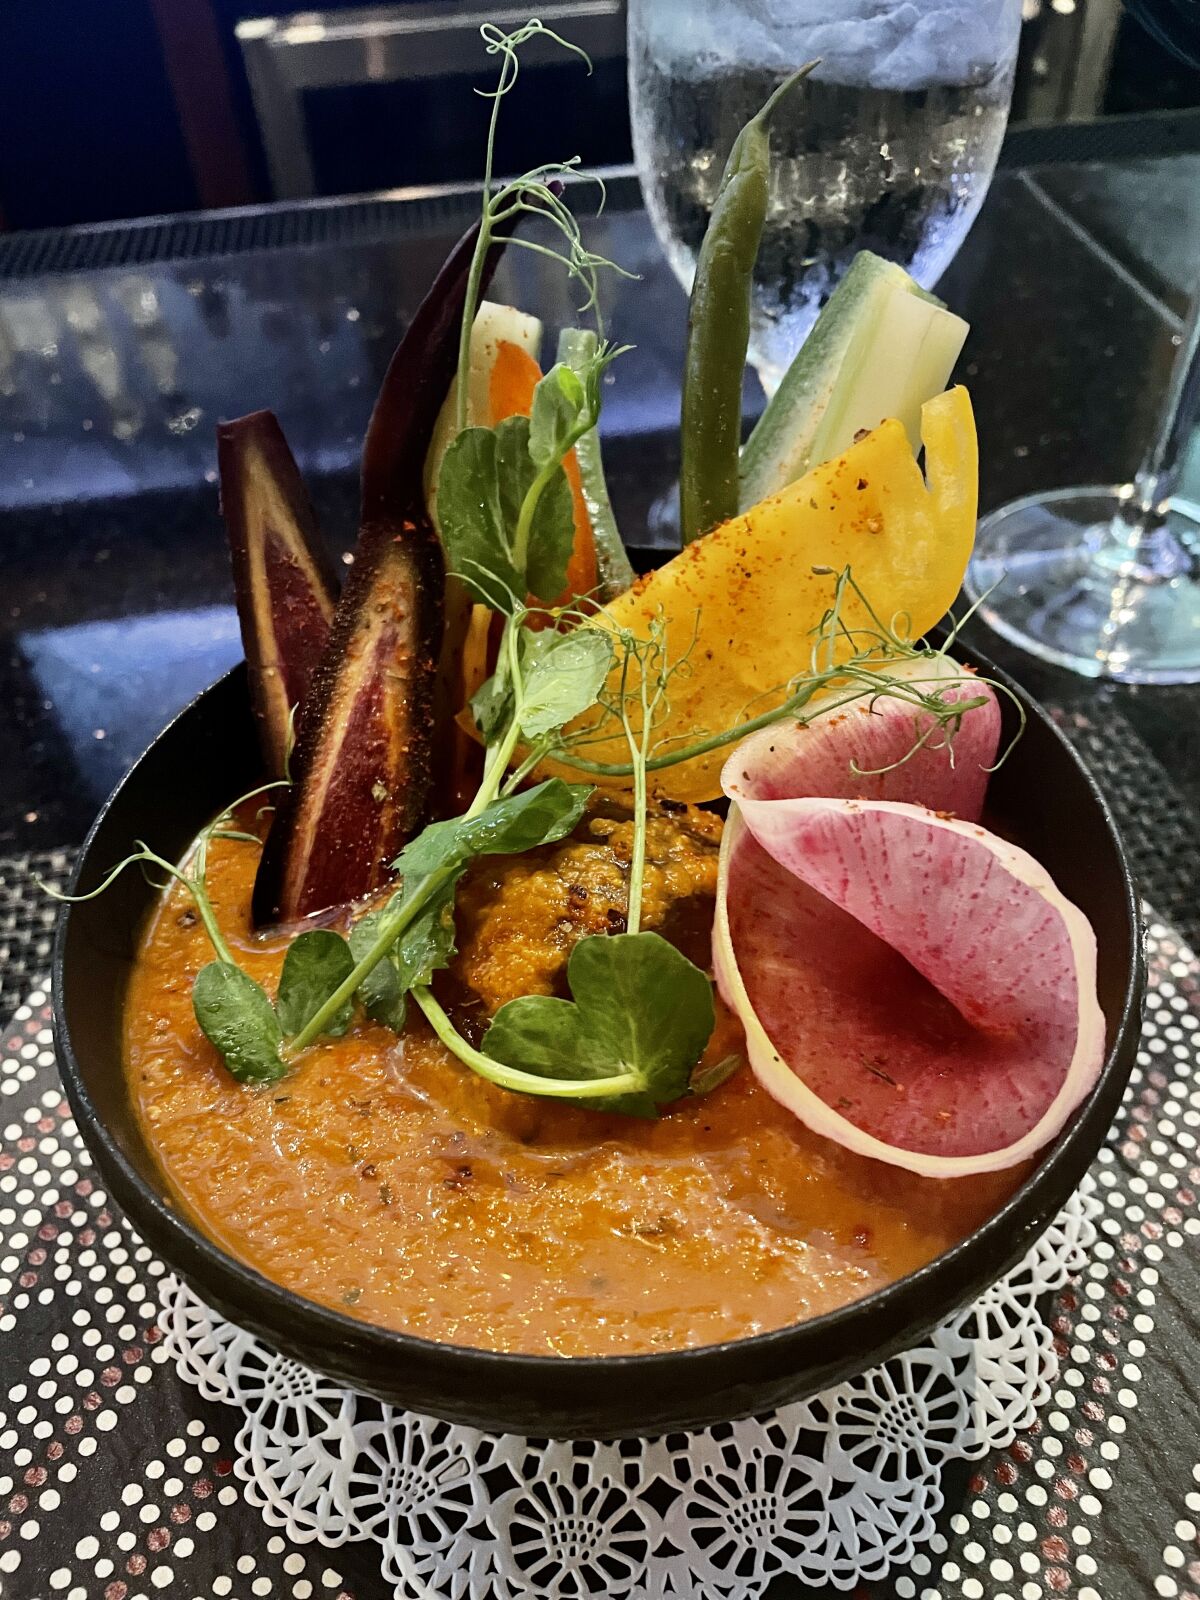 The gazpacho soup at Polo Steakhouse in Carlsbad.